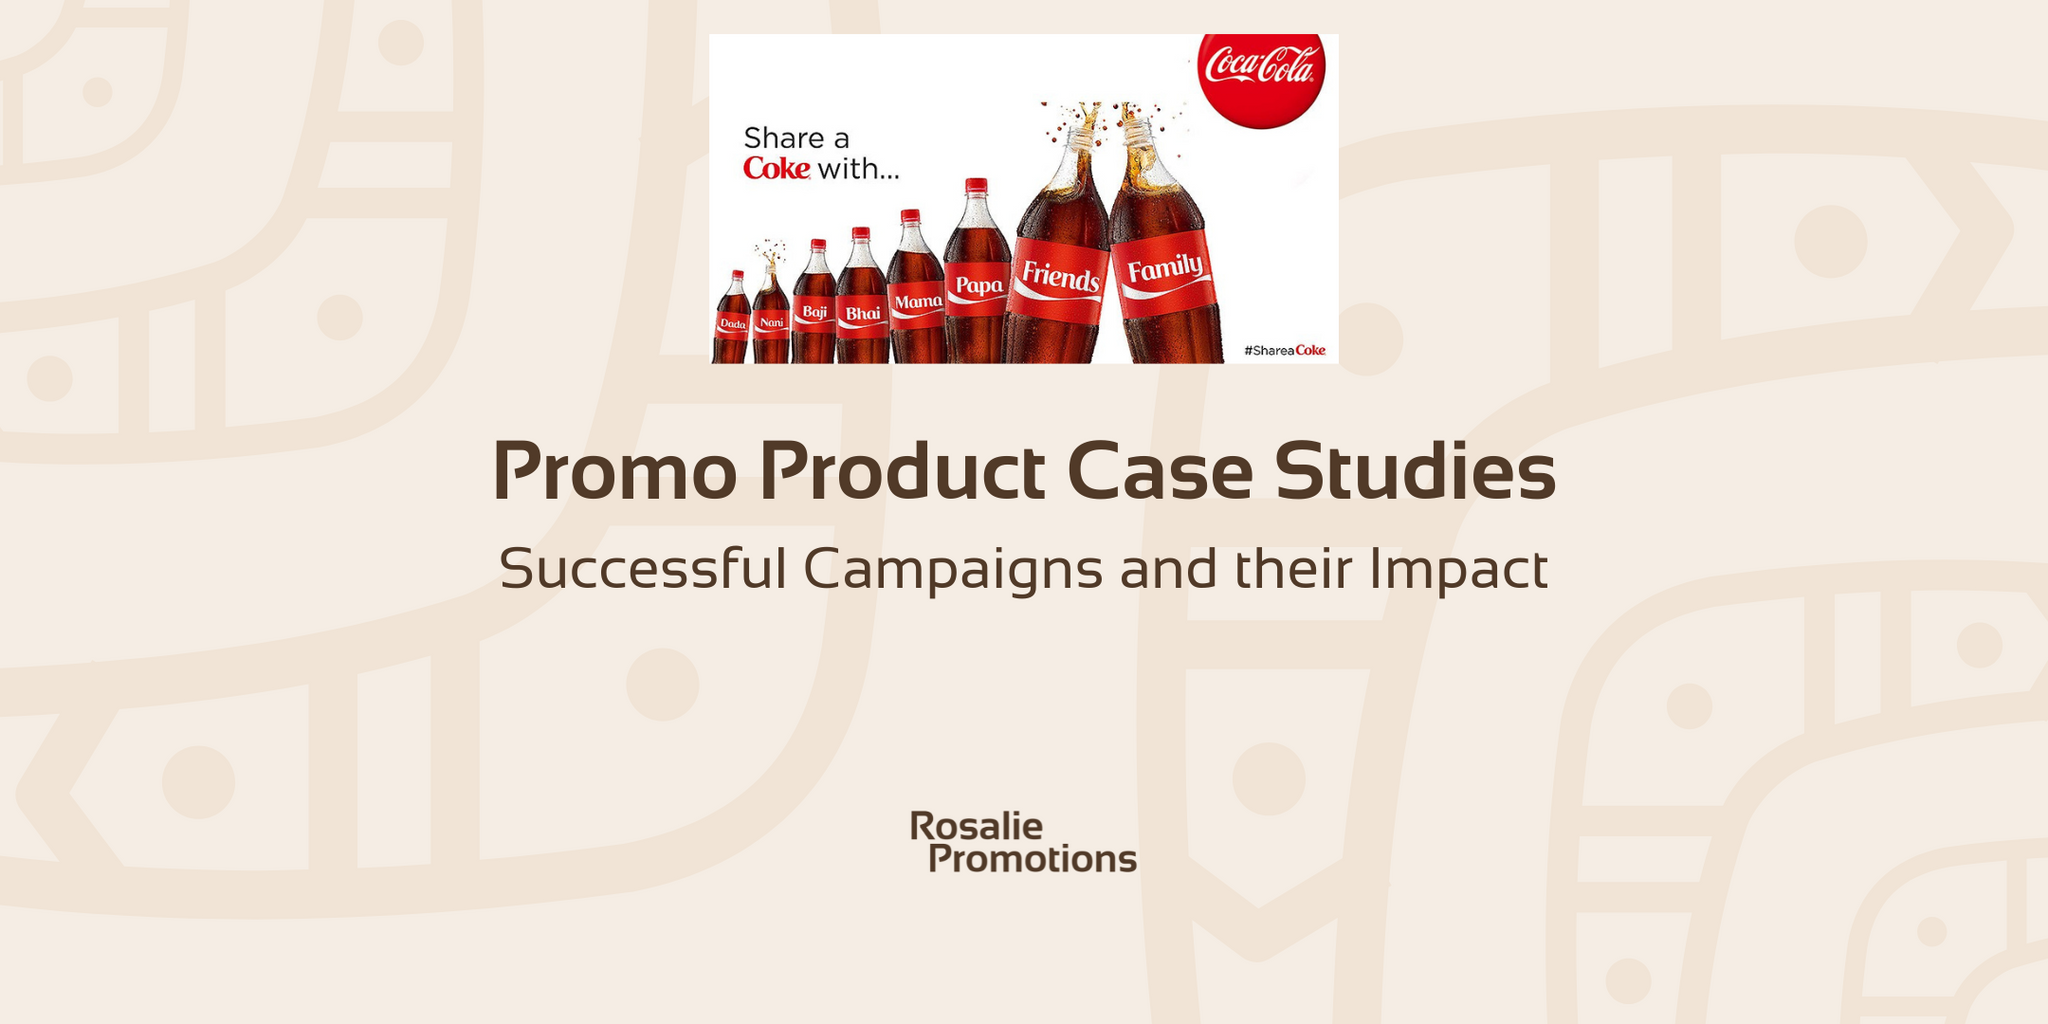 Case Studies: Successful Promotional Product Campaigns and Their Impact